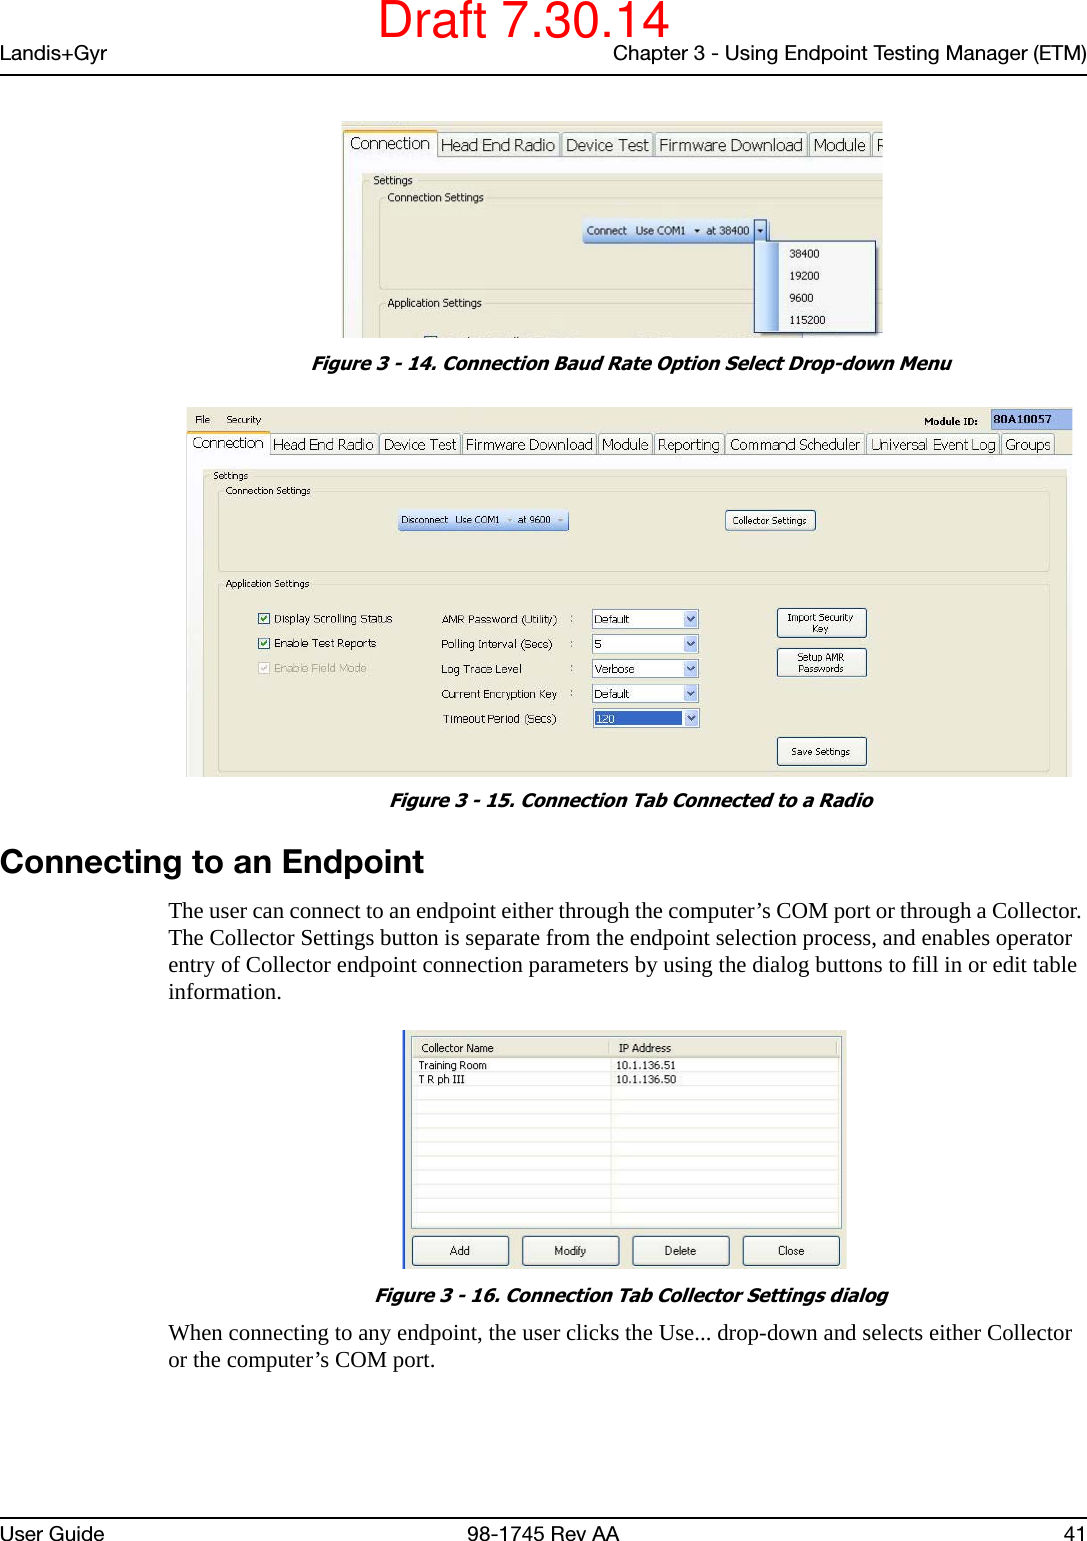 Landis+Gyr Chapter 3 - Using Endpoint Testing Manager (ETM)User Guide 98-1745 Rev AA 41 Figure 3 - 14. Connection Baud Rate Option Select Drop-down Menu Figure 3 - 15. Connection Tab Connected to a RadioConnecting to an EndpointThe user can connect to an endpoint either through the computer’s COM port or through a Collector. The Collector Settings button is separate from the endpoint selection process, and enables operator entry of Collector endpoint connection parameters by using the dialog buttons to fill in or edit table information. Figure 3 - 16. Connection Tab Collector Settings dialogWhen connecting to any endpoint, the user clicks the Use... drop-down and selects either Collector or the computer’s COM port.Draft 7.30.14